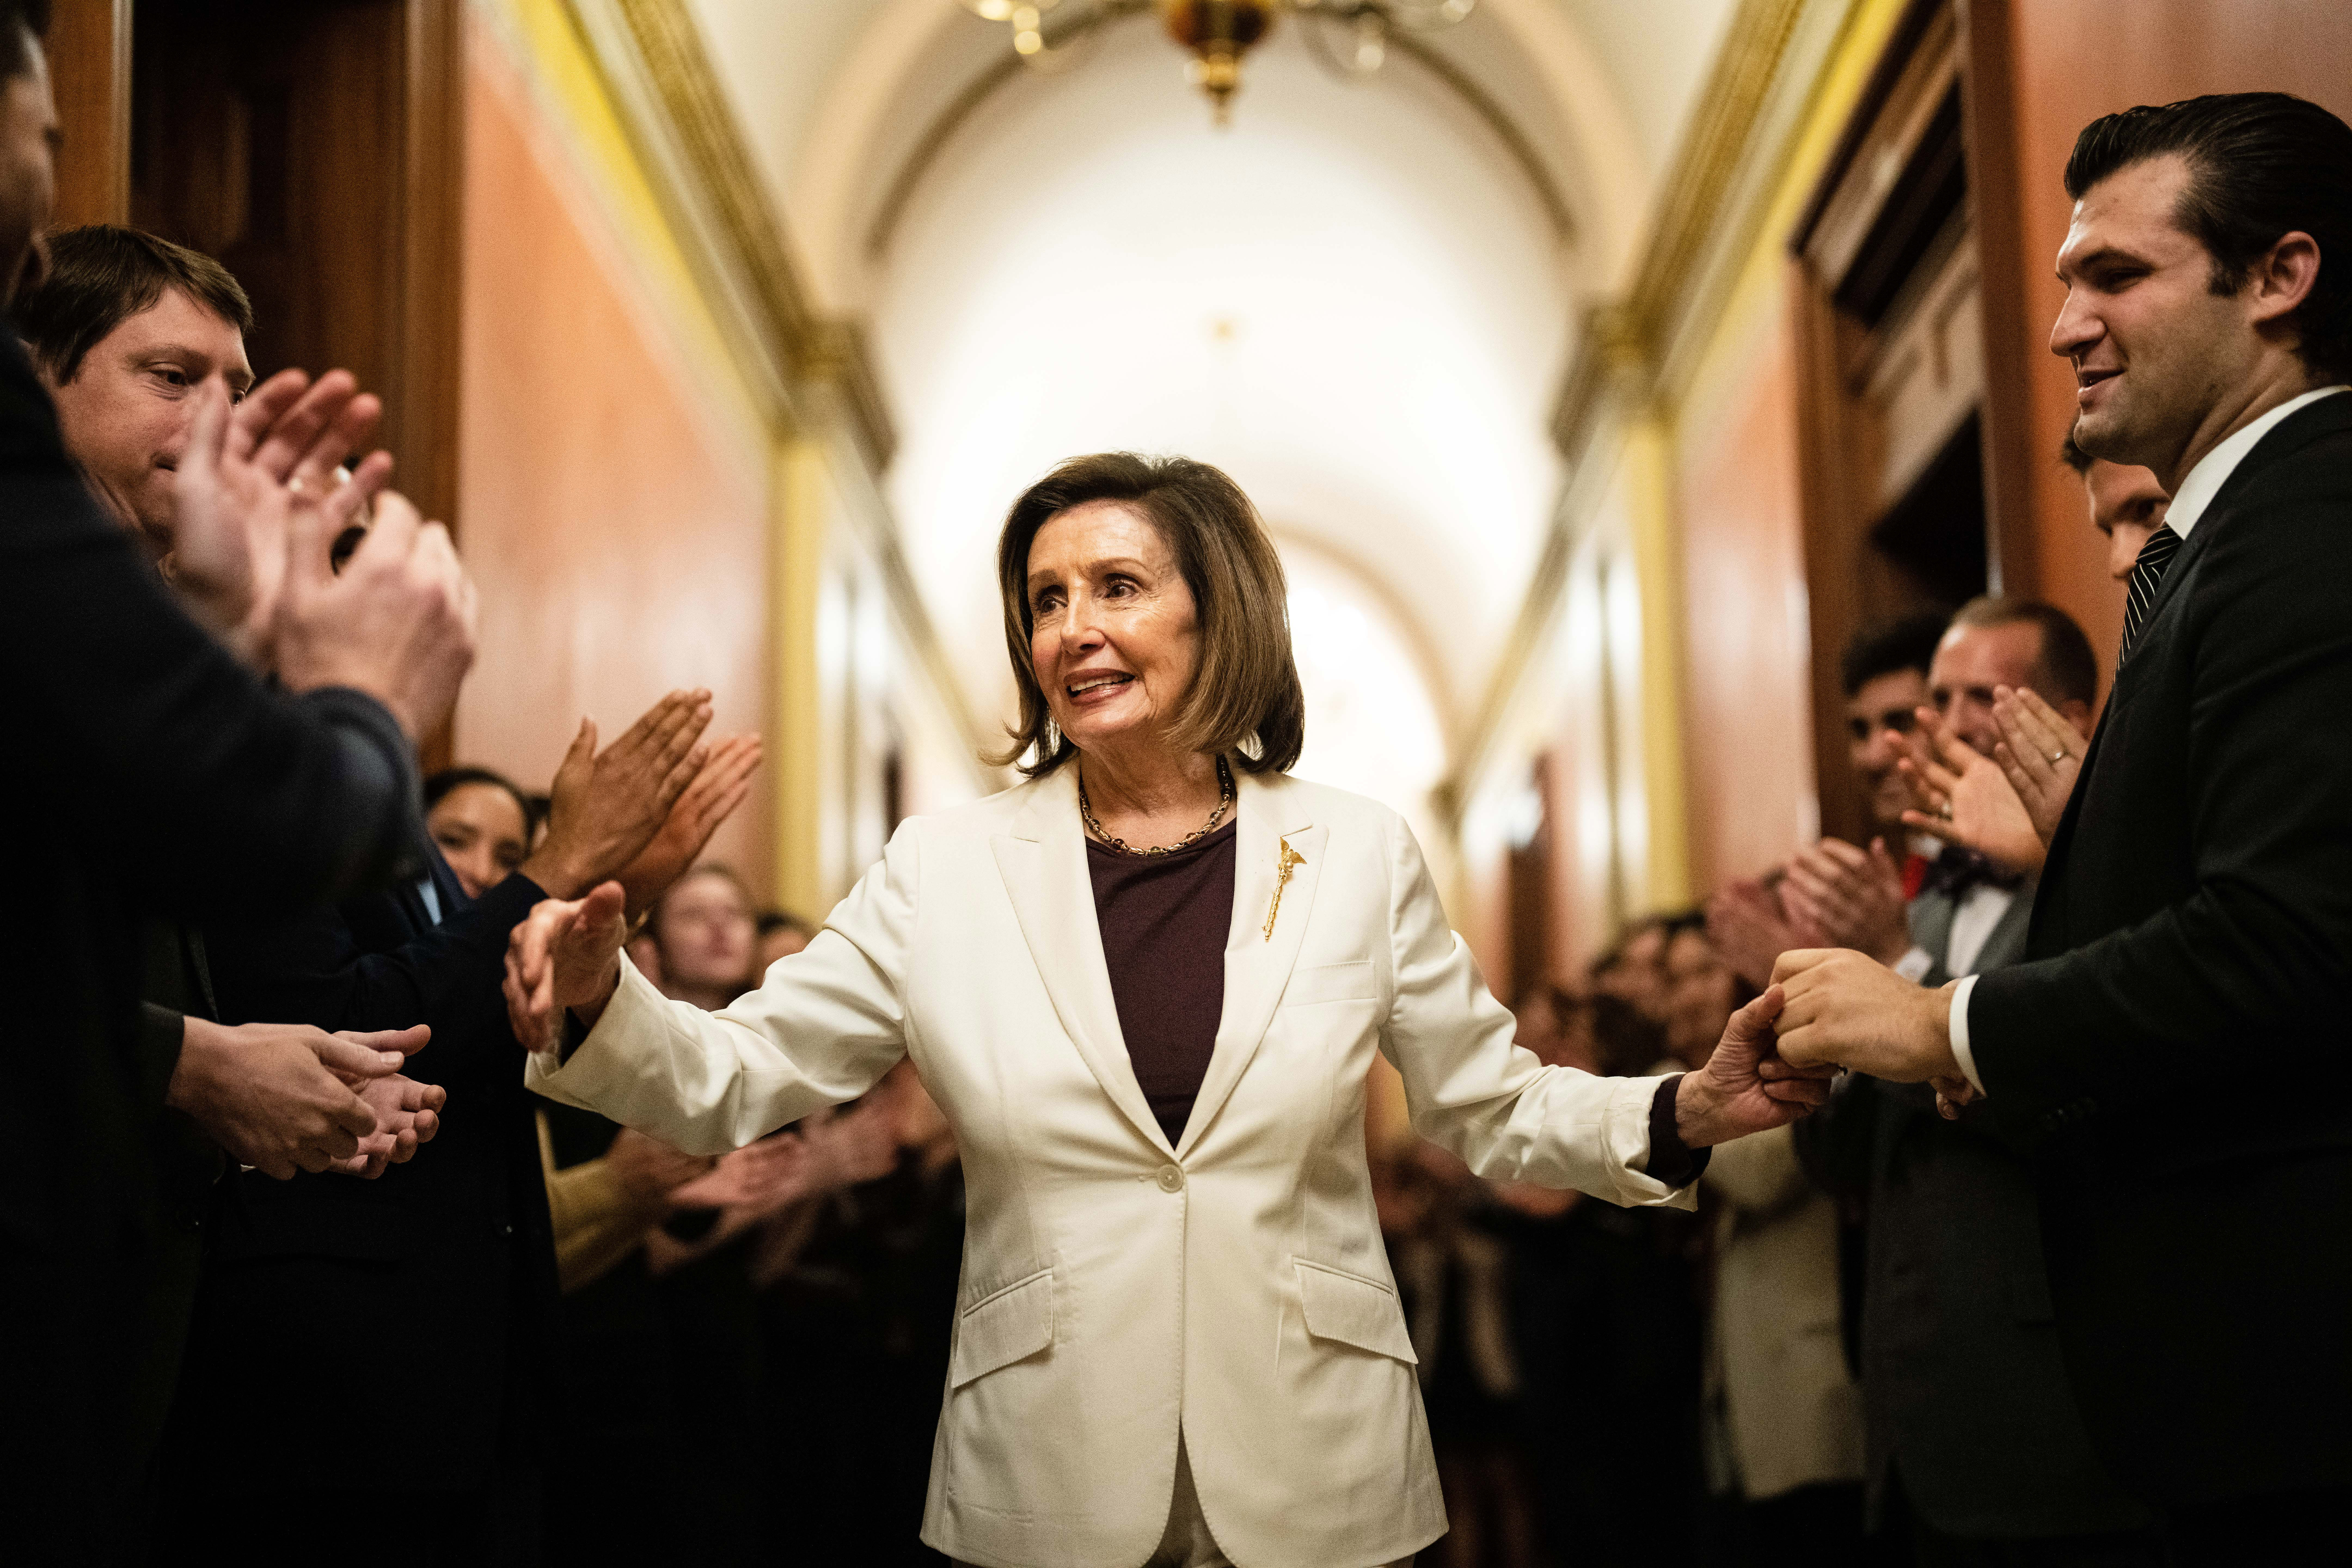 On Biden’s Exit, Pelosi Says She Was Driven by Need to Defeat Trump